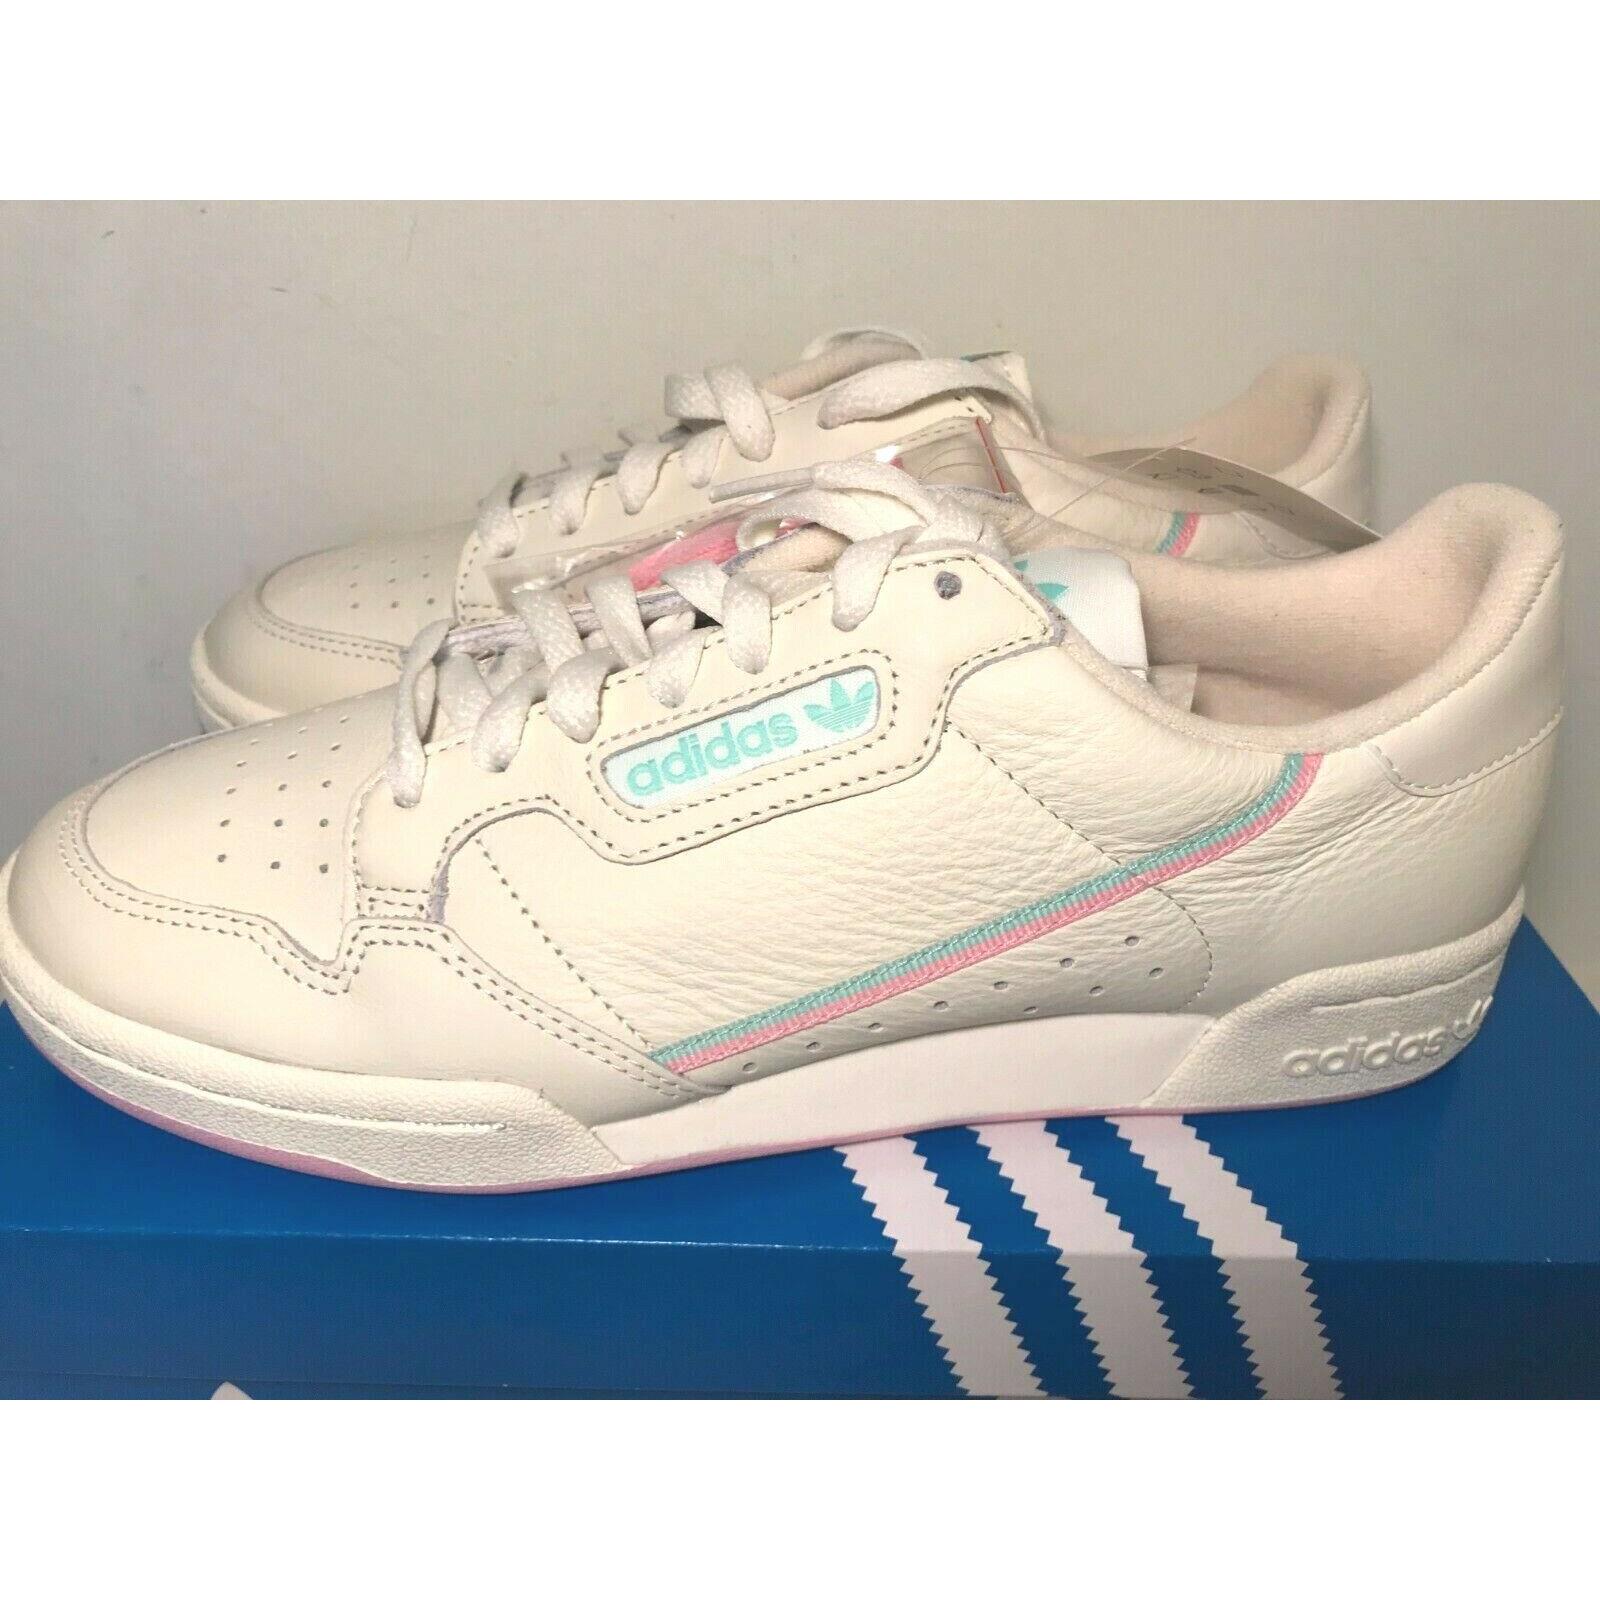 Anzai digit excel Adidas BD7645 Continental 80 Men Women Running Shoes 7.5 Mens Sneakers  Ivory | 191525039047 - Adidas shoes - Ivory w/ Pink & Teal Accents |  SporTipTop